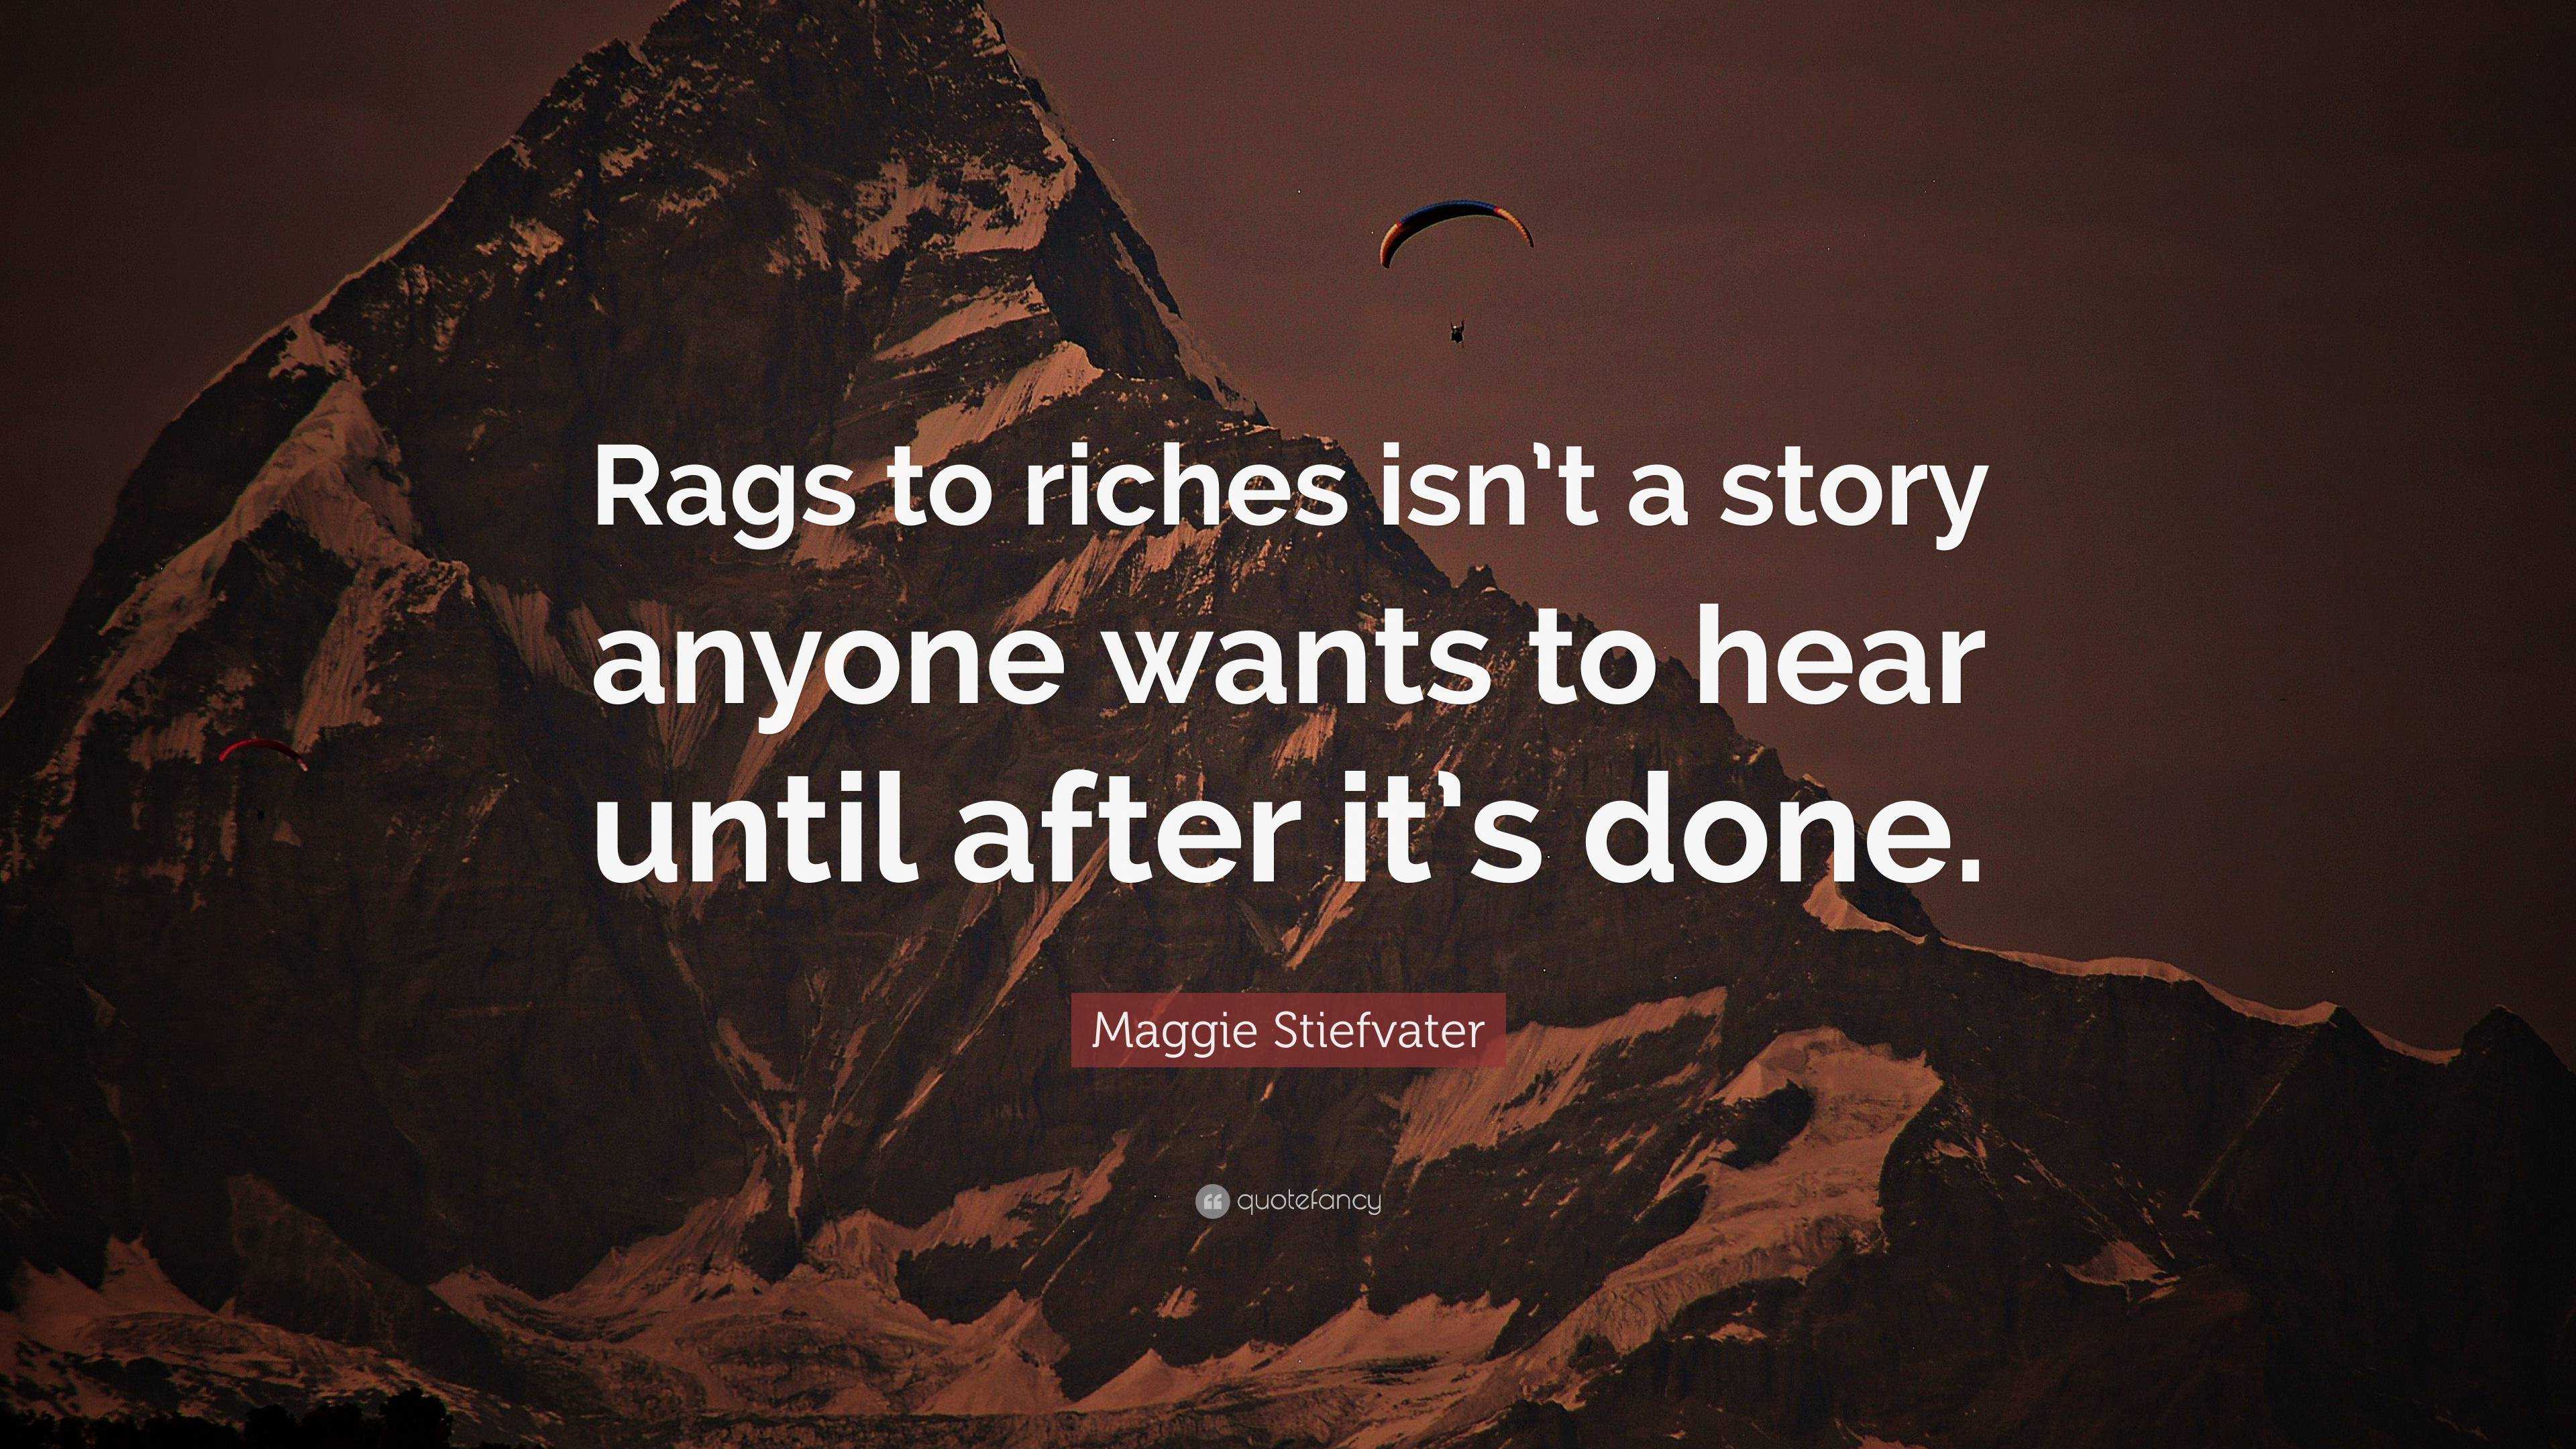 Rags to Riches? Why These Stories Are Doing More Harm Than Good